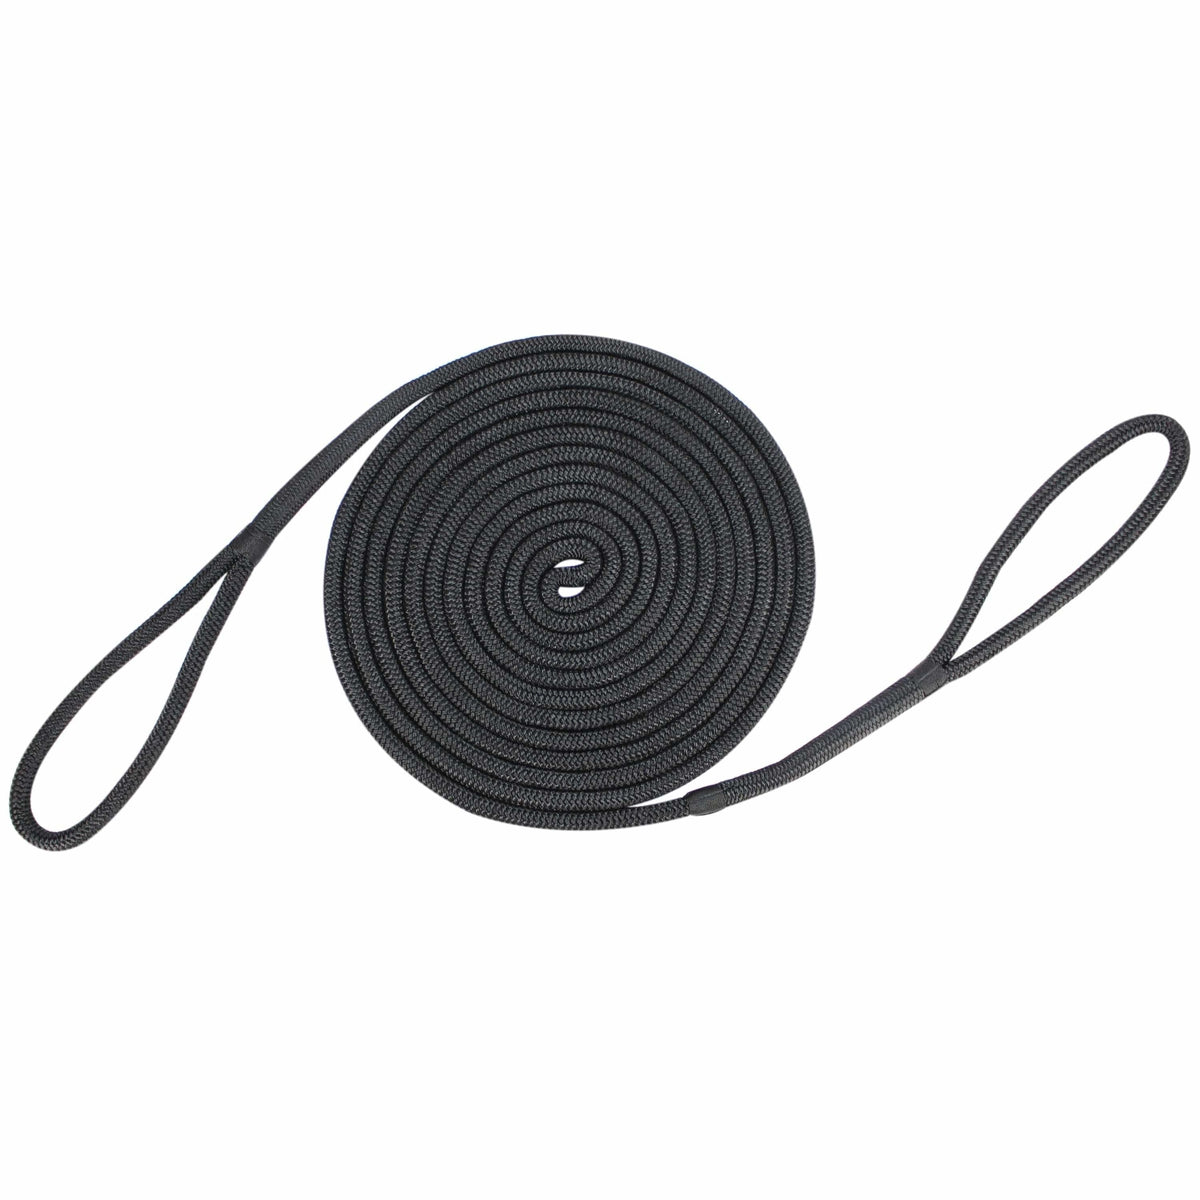 Extreme Max Line for Mooring Buoys 30' Black #3006.2406